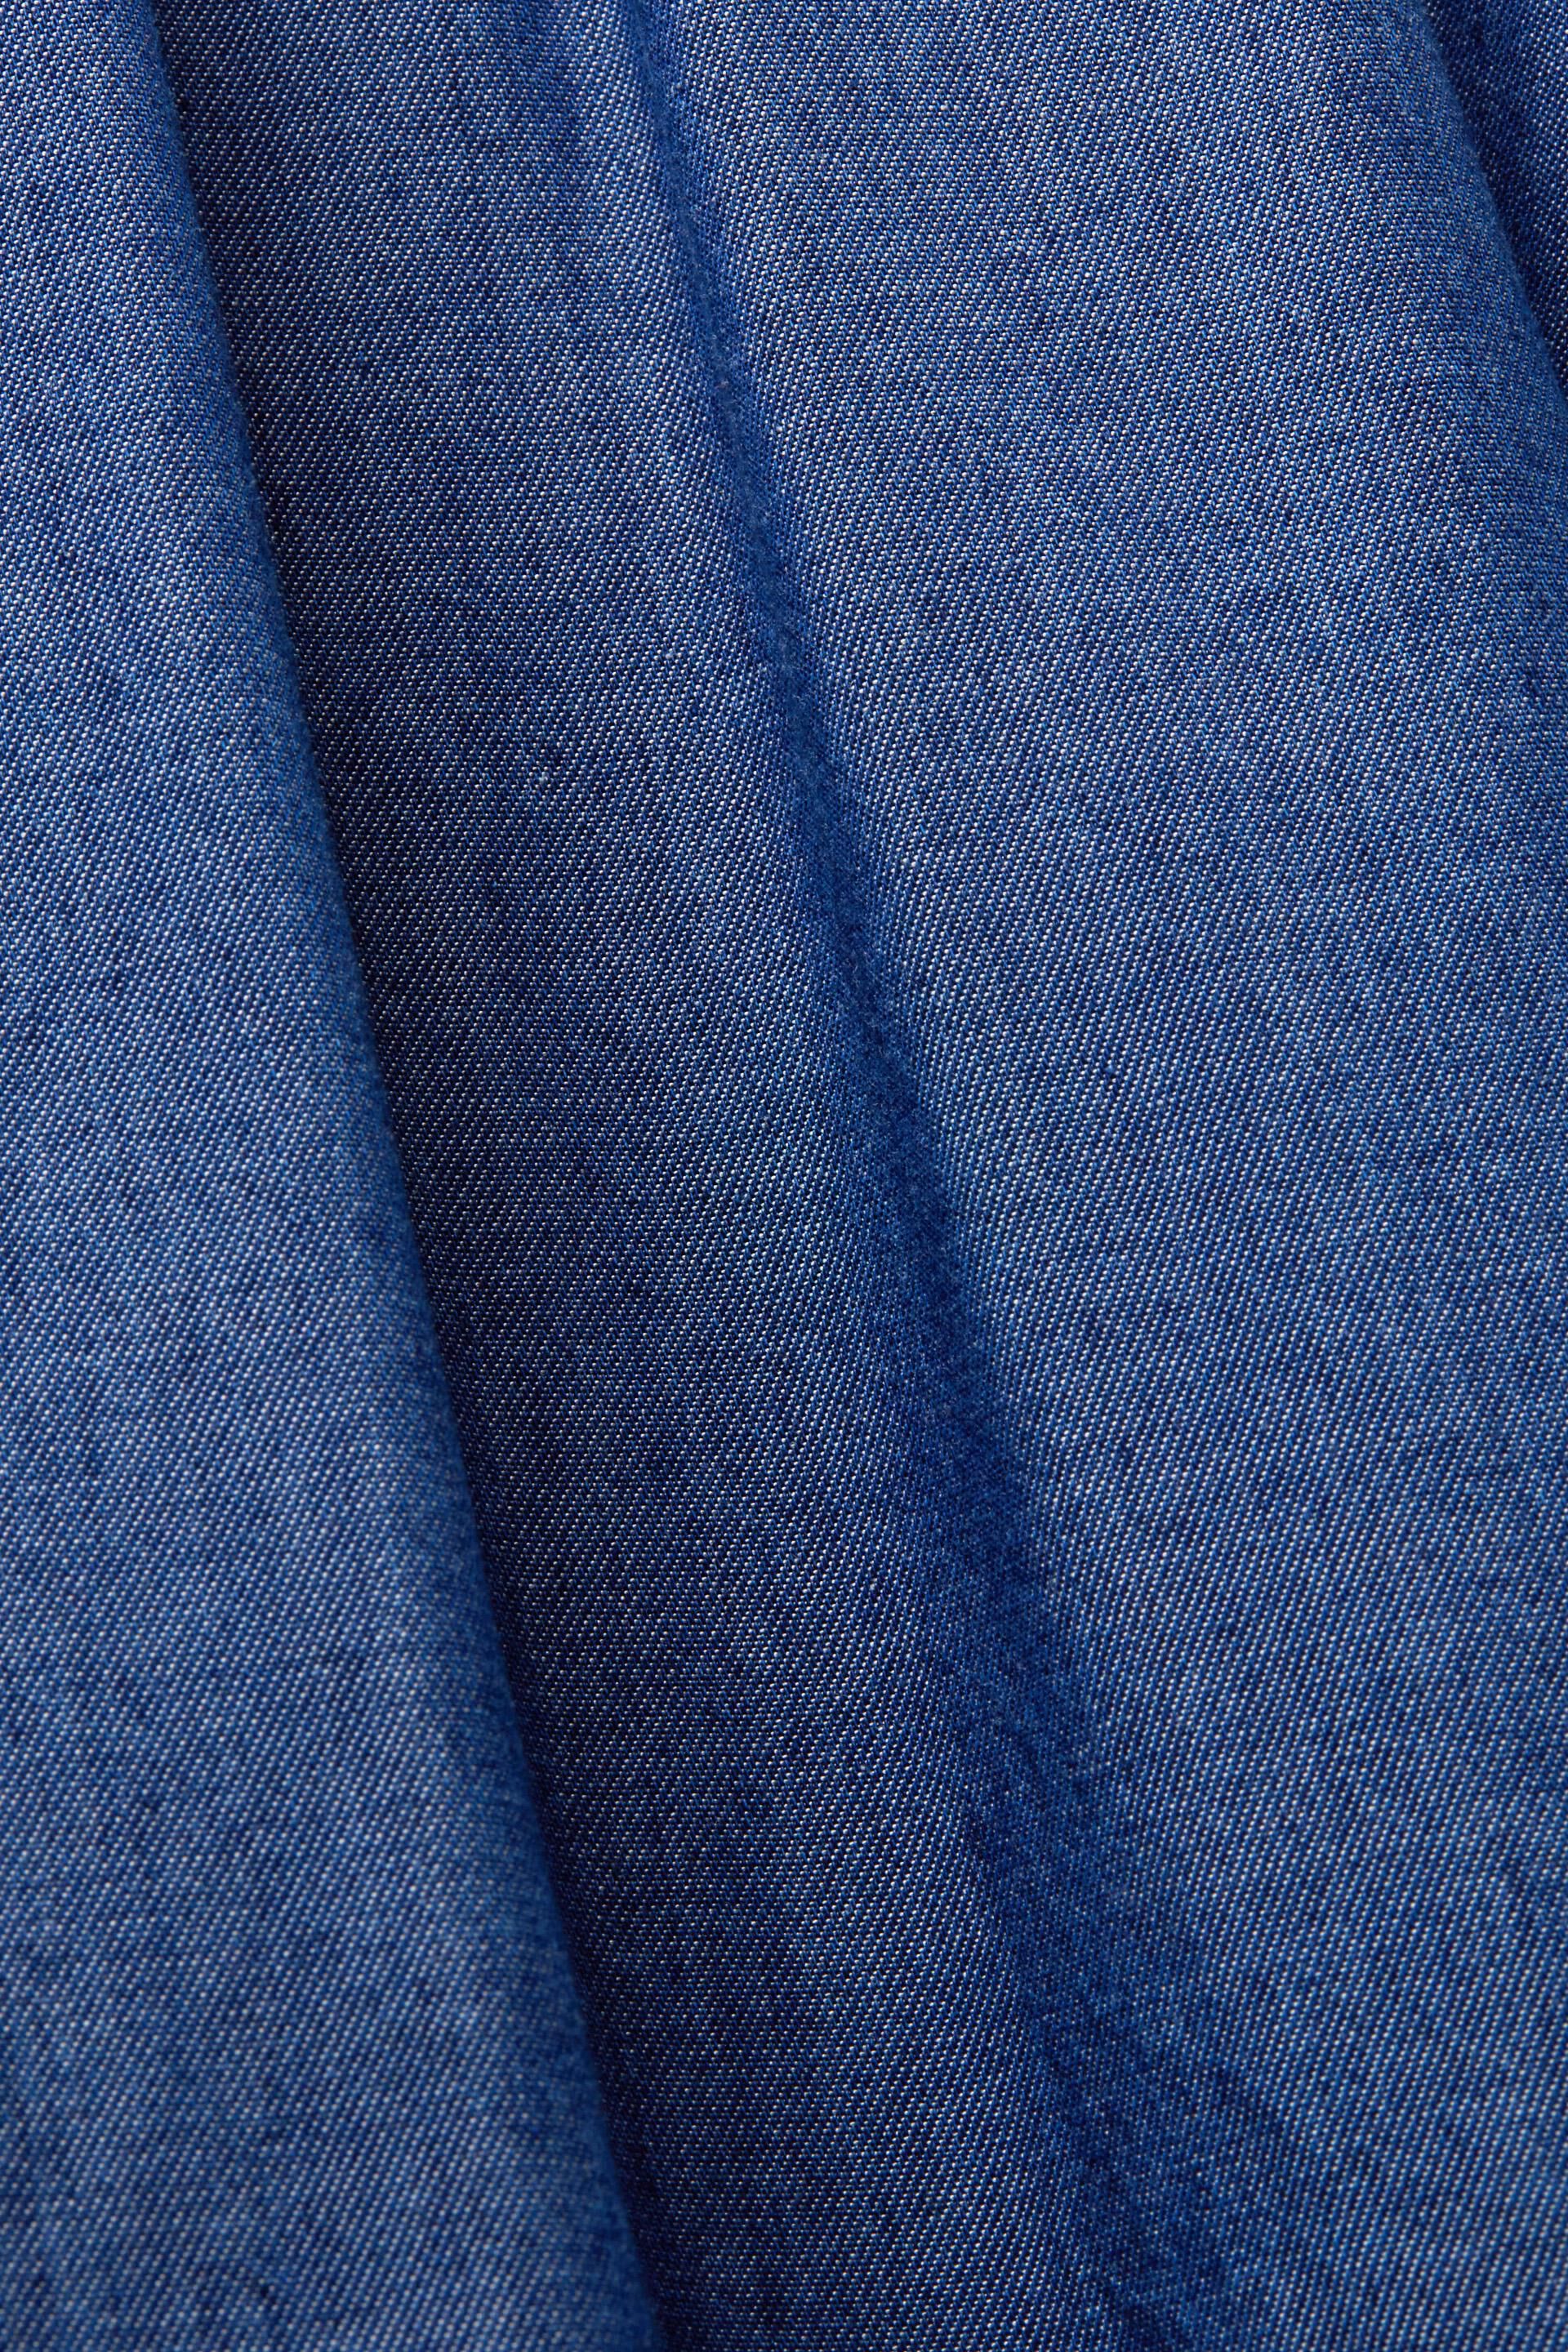 Denim material Denim Fabric 150x50cm Soft Thin Tencel Clothing Fabric  High-end Silky Fabric Suitable for Shirt Multiple Colour (Color : Royal  blue) : Amazon.ca: Home